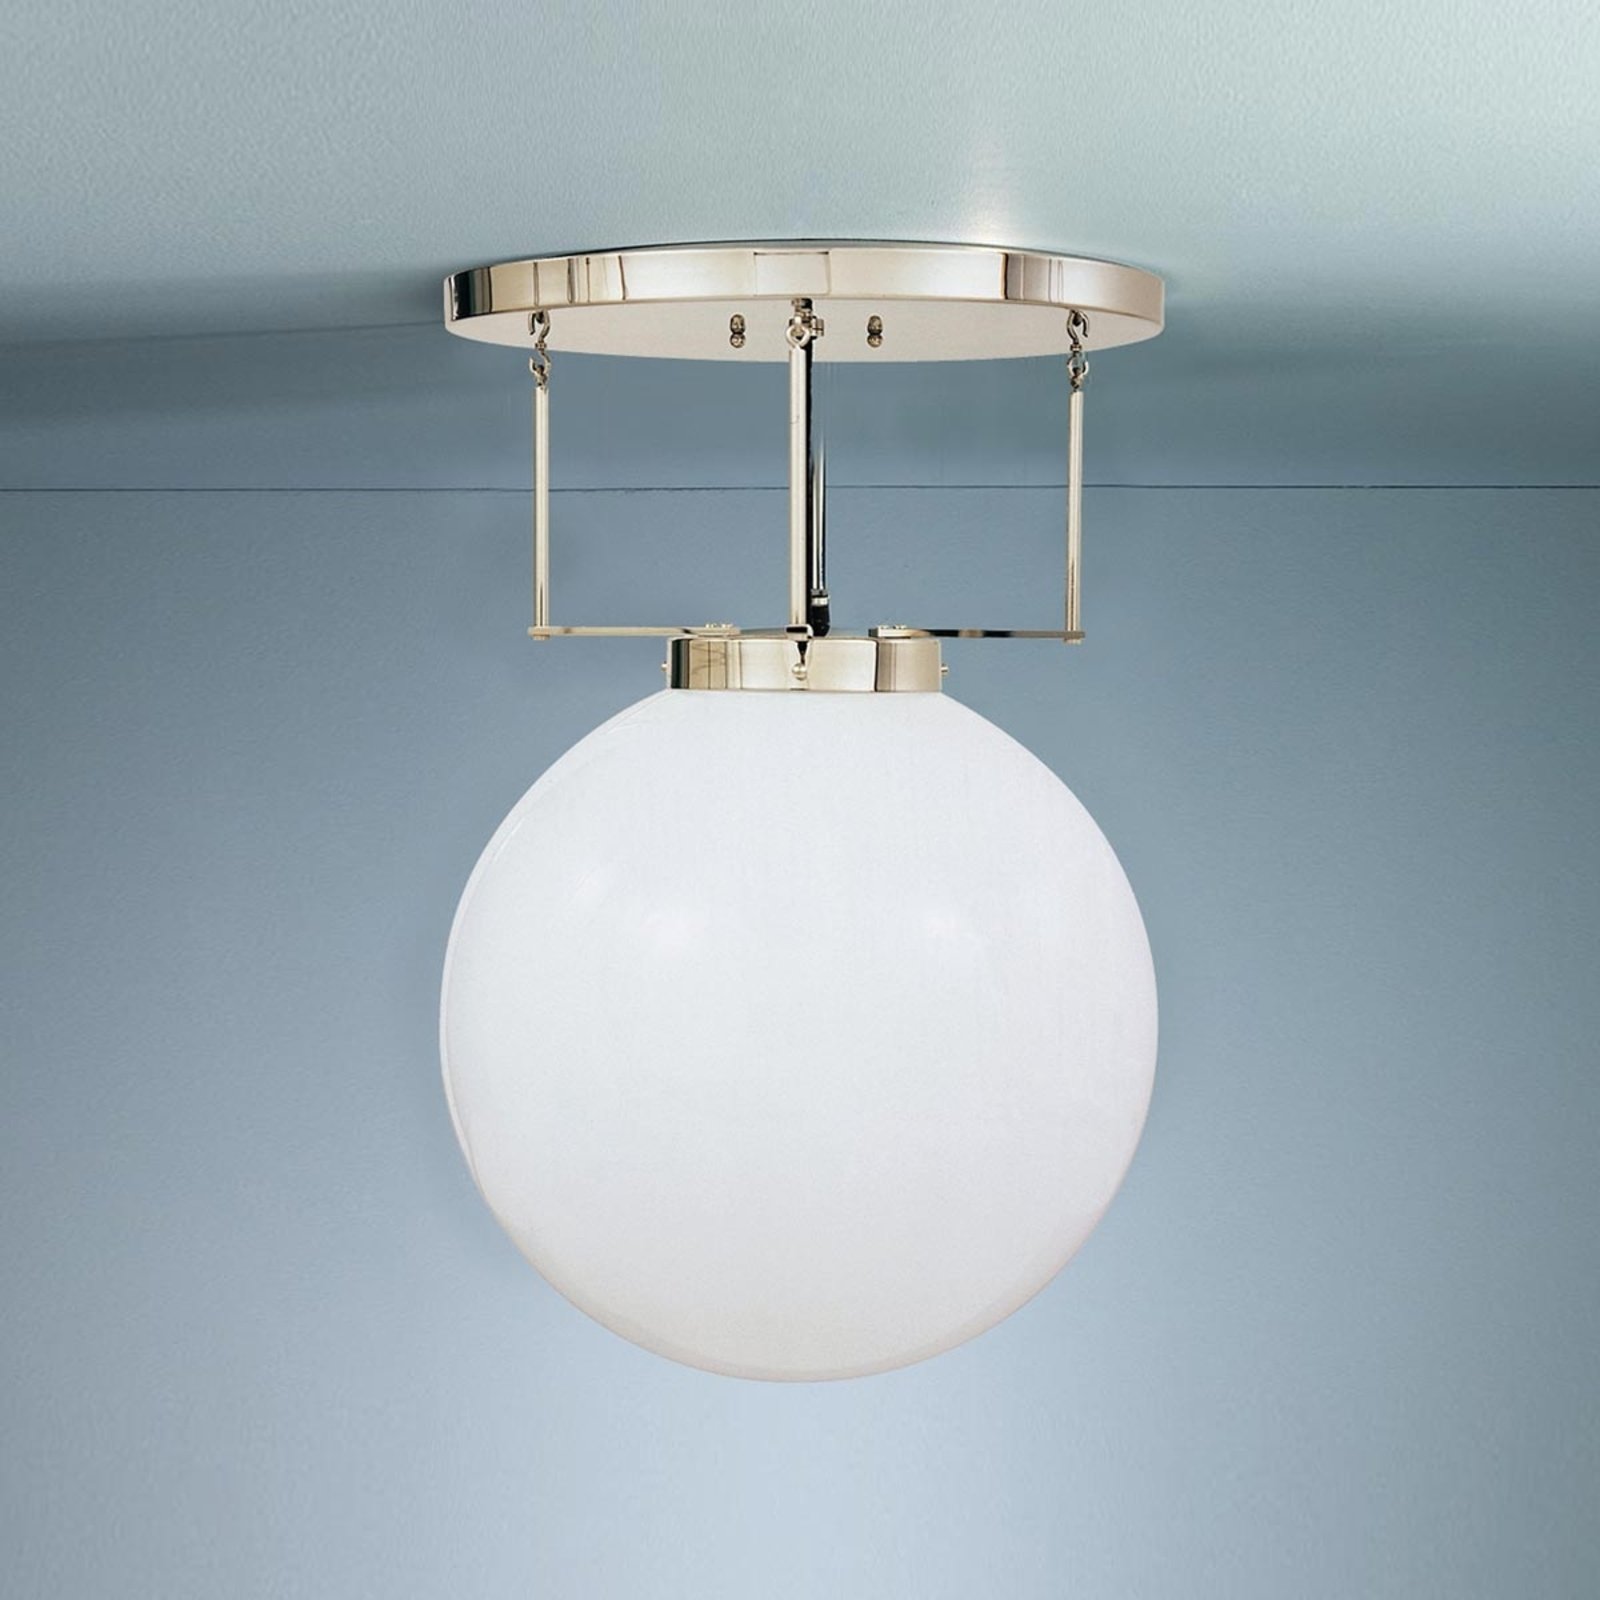 Ceiling light made of brass in Bauhaus style 25 cm